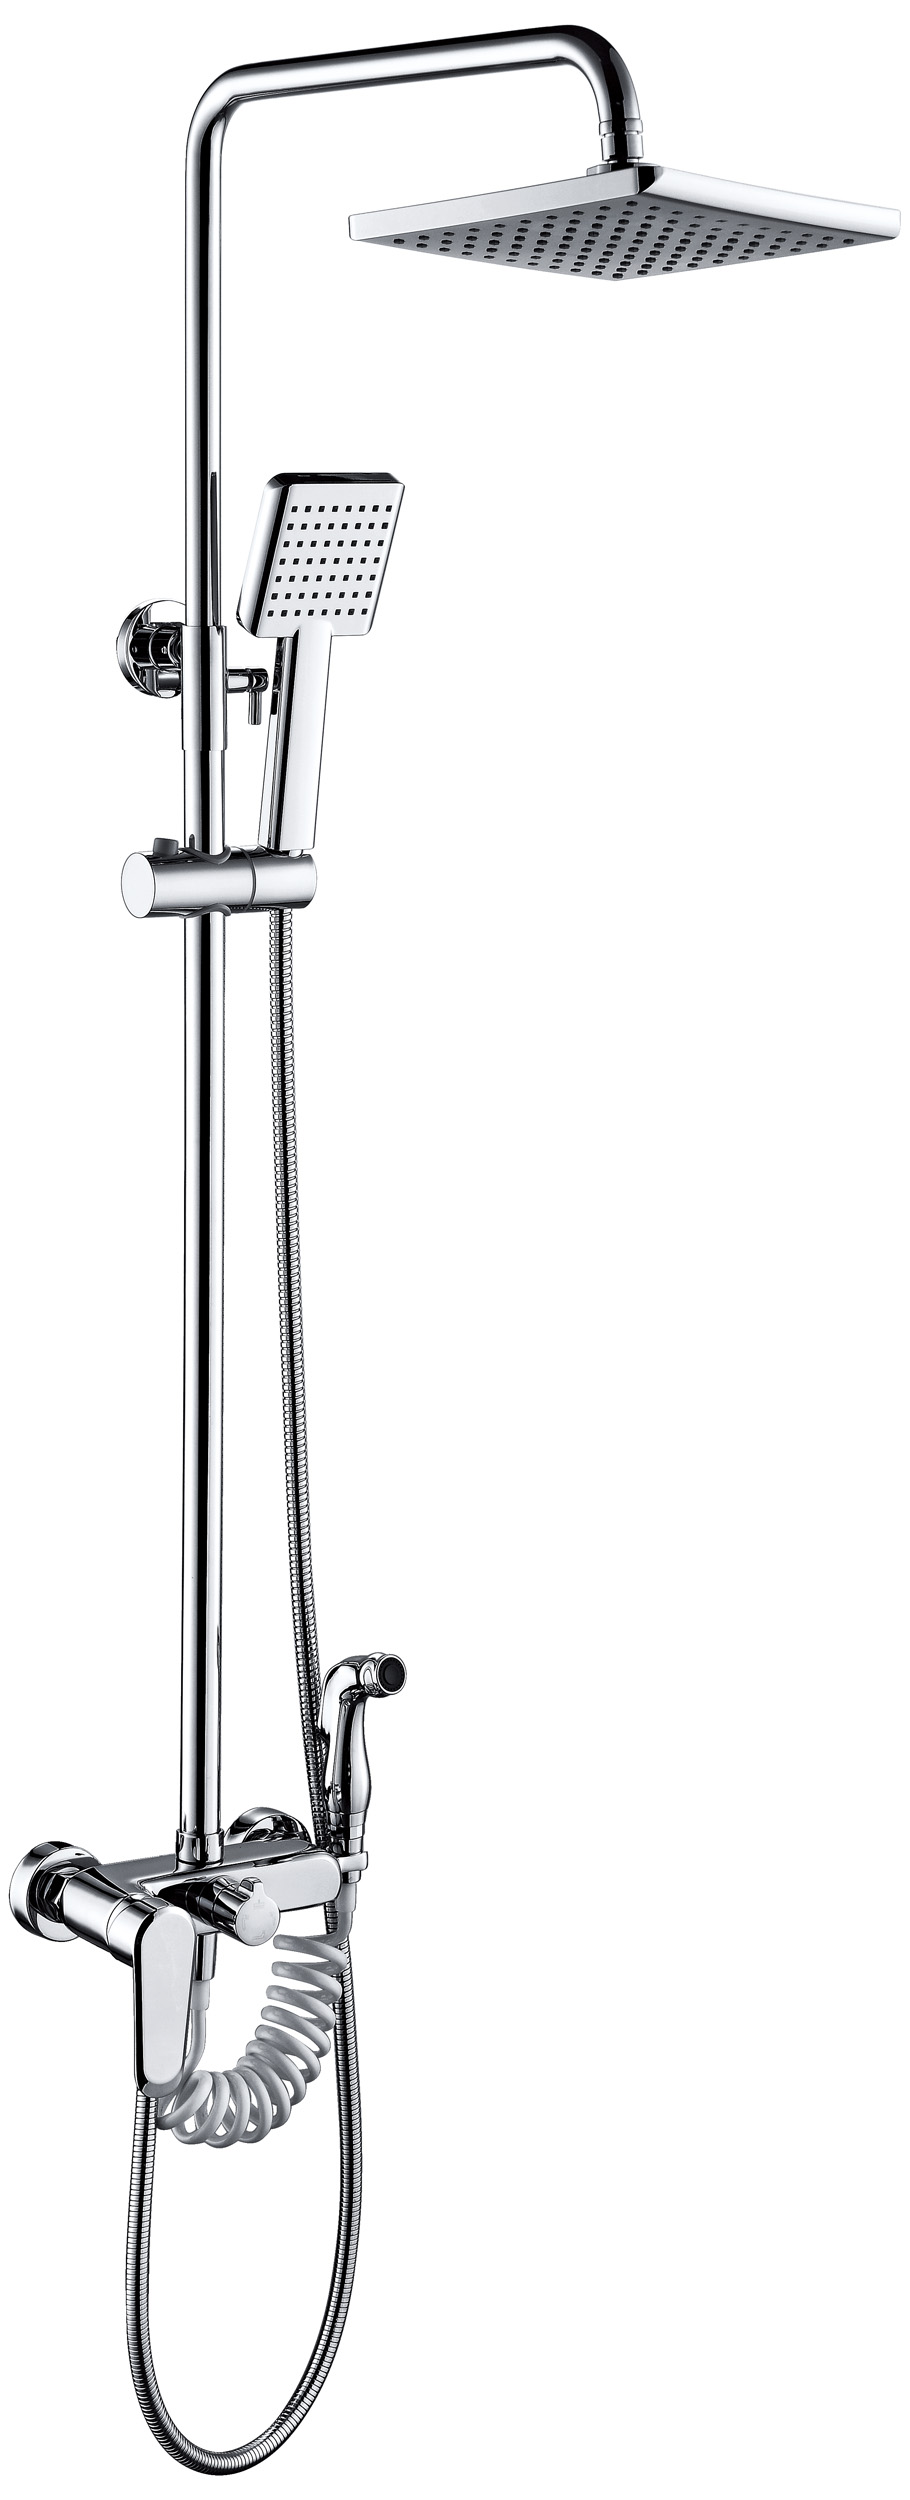 Modern Single Handle Exposed Shower Faucets set